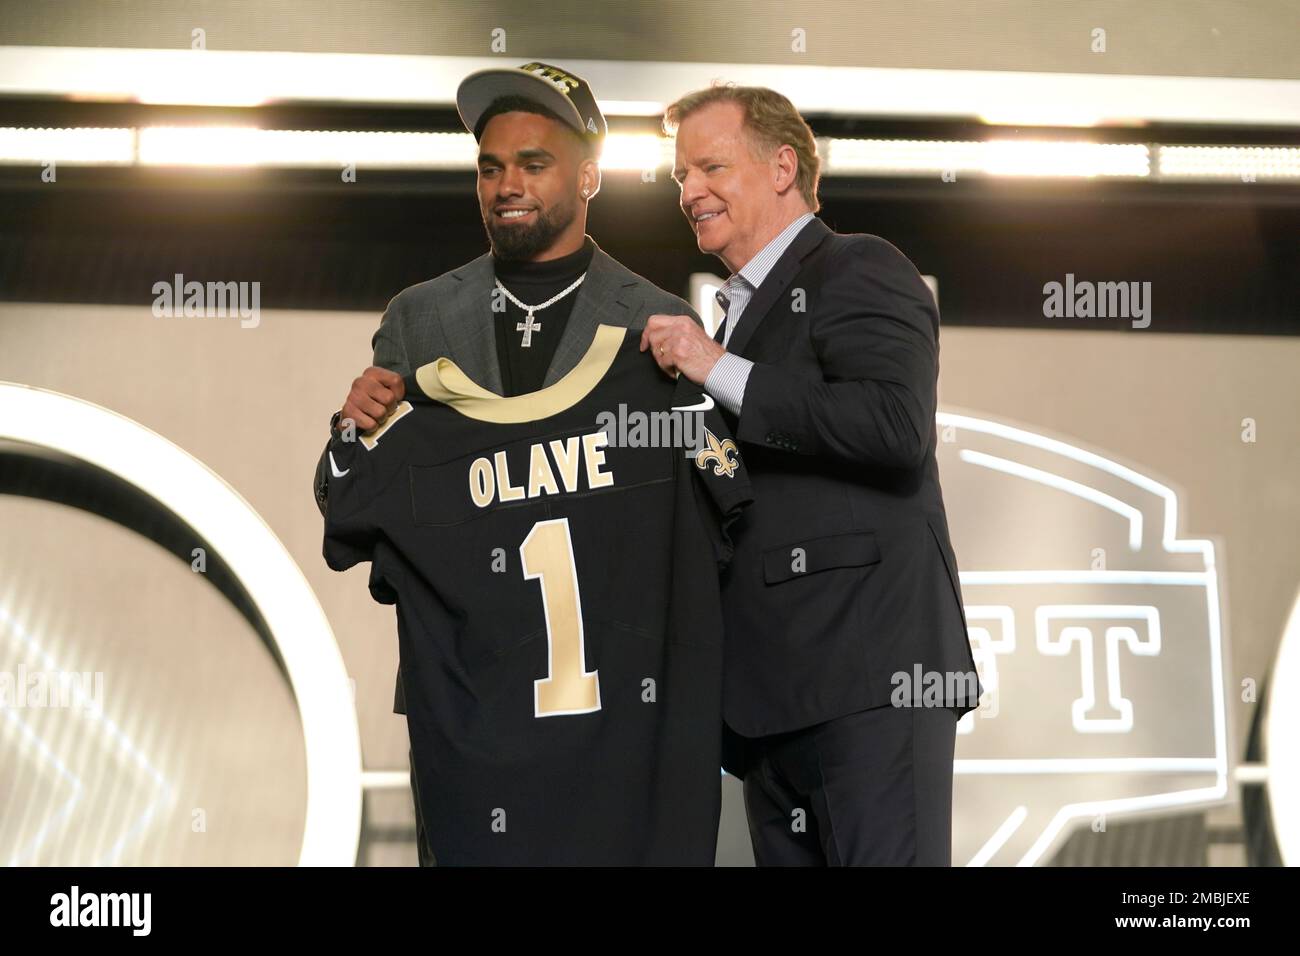 Ohio State wide receiver Chris Olave, left, and Roger Goodell, Commissioner  of the NFL, hold a team jersey after Chris Olave was chosen by the Atlanta  Falcons with the 8th pick at